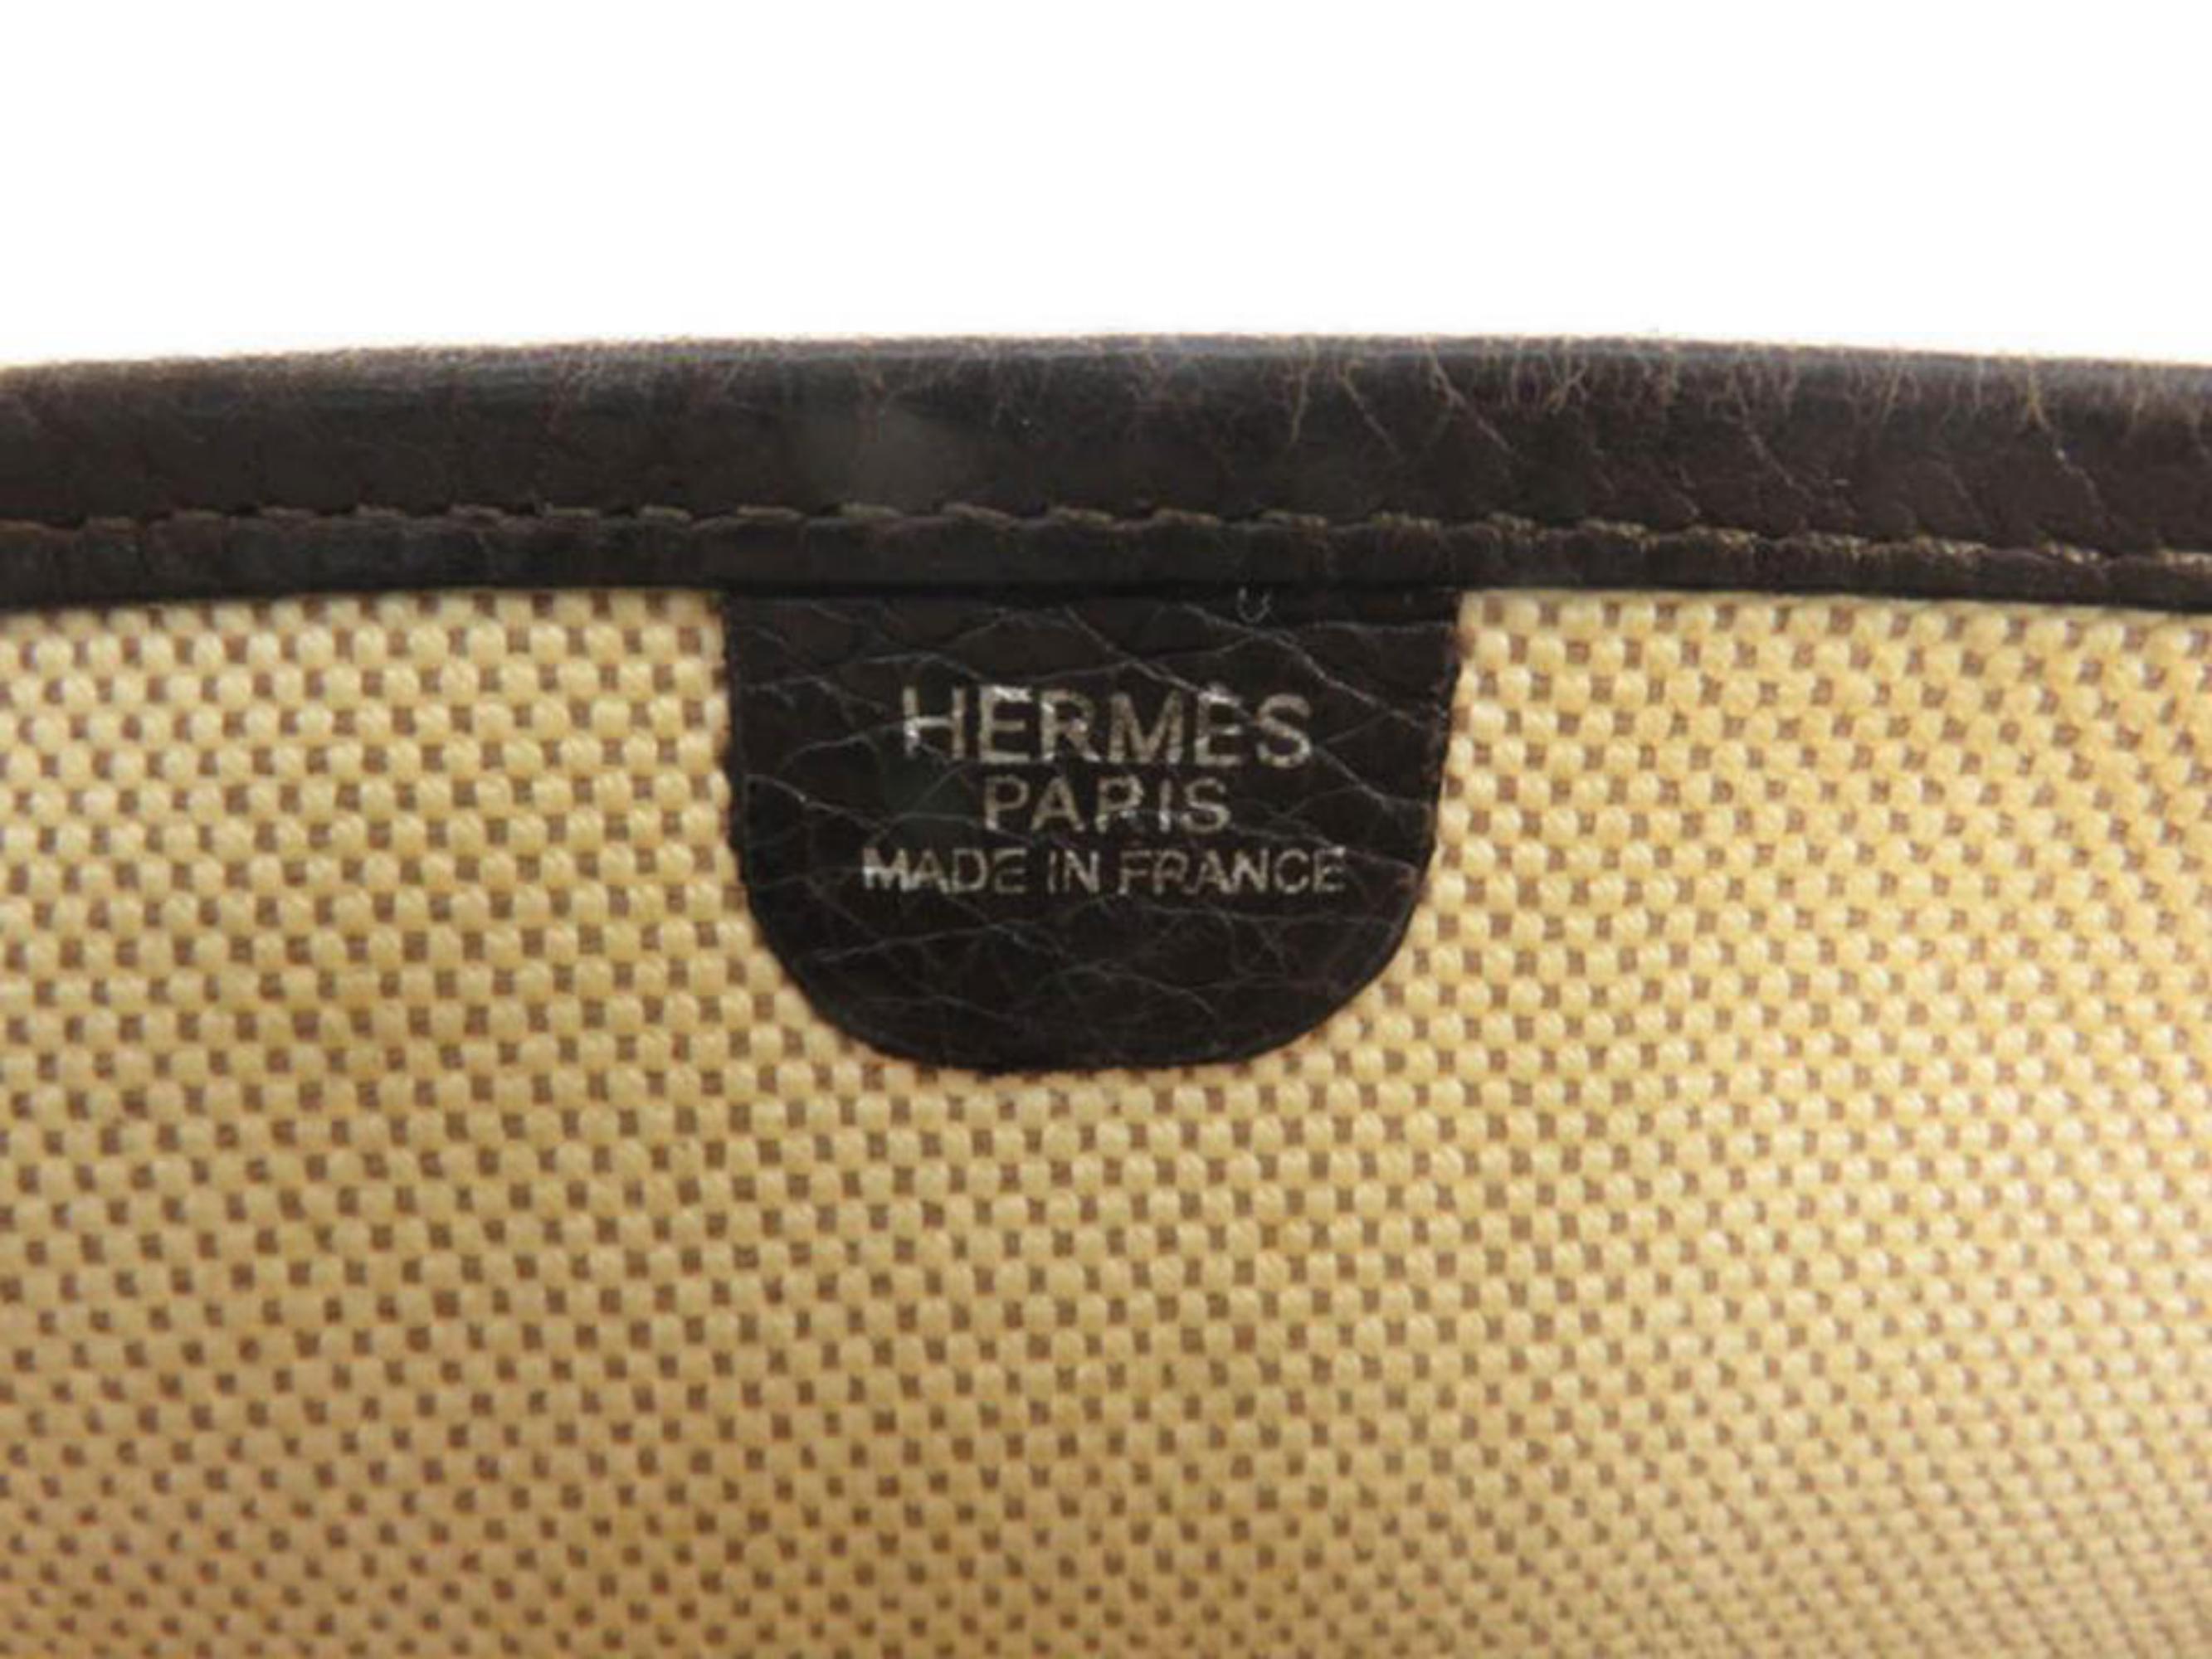 Hermès Evelyne Toile Ii 868833 Brown Canvas Messenger Bag In Good Condition For Sale In Forest Hills, NY